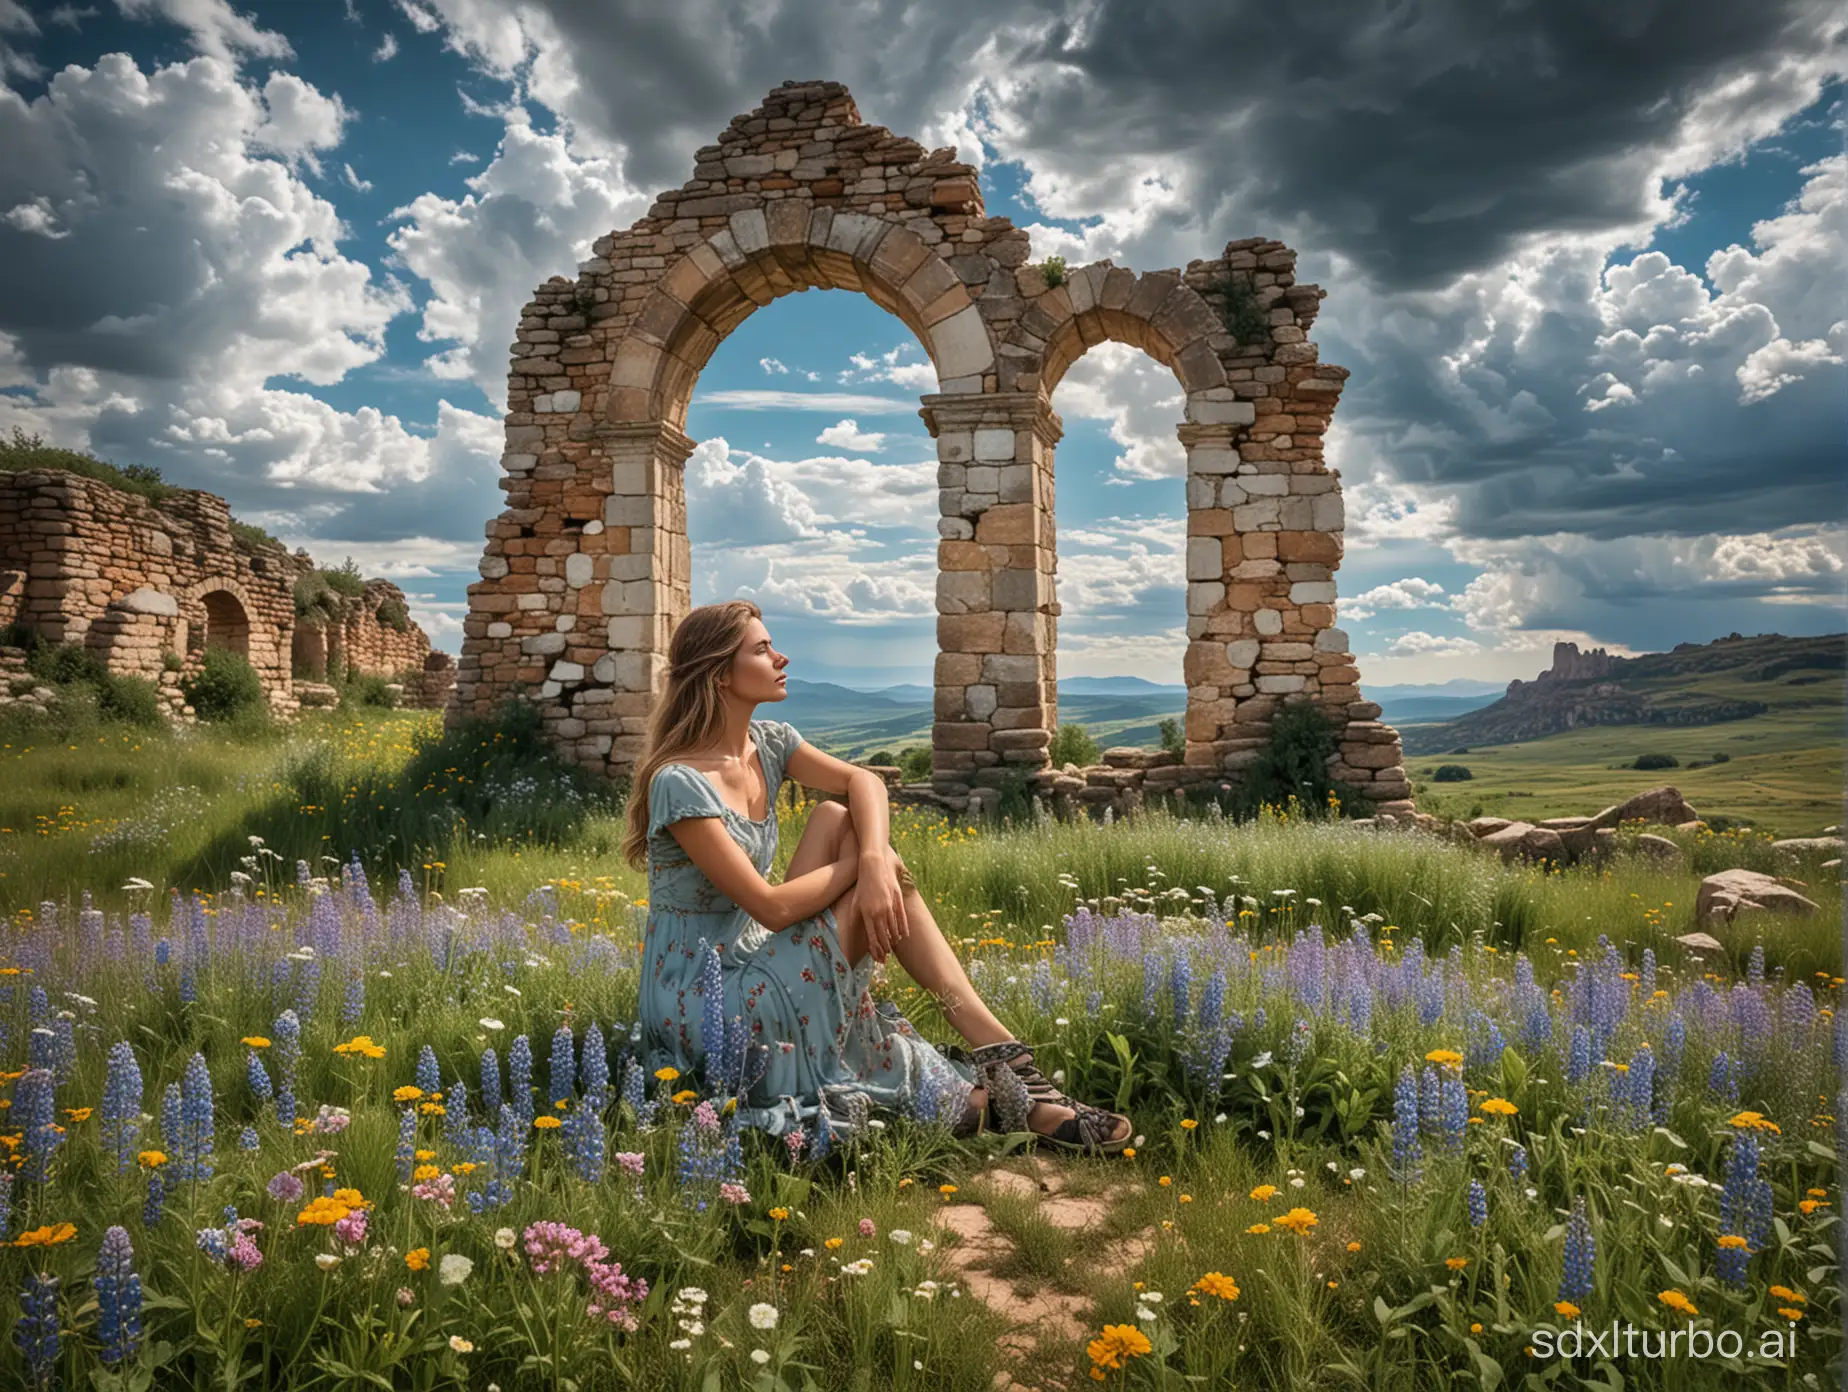 Ruins-Encircled-by-Wildflowers-and-Herbs-with-Majestic-Clouds-and-a-GlassEnclosed-Pretty-Woman